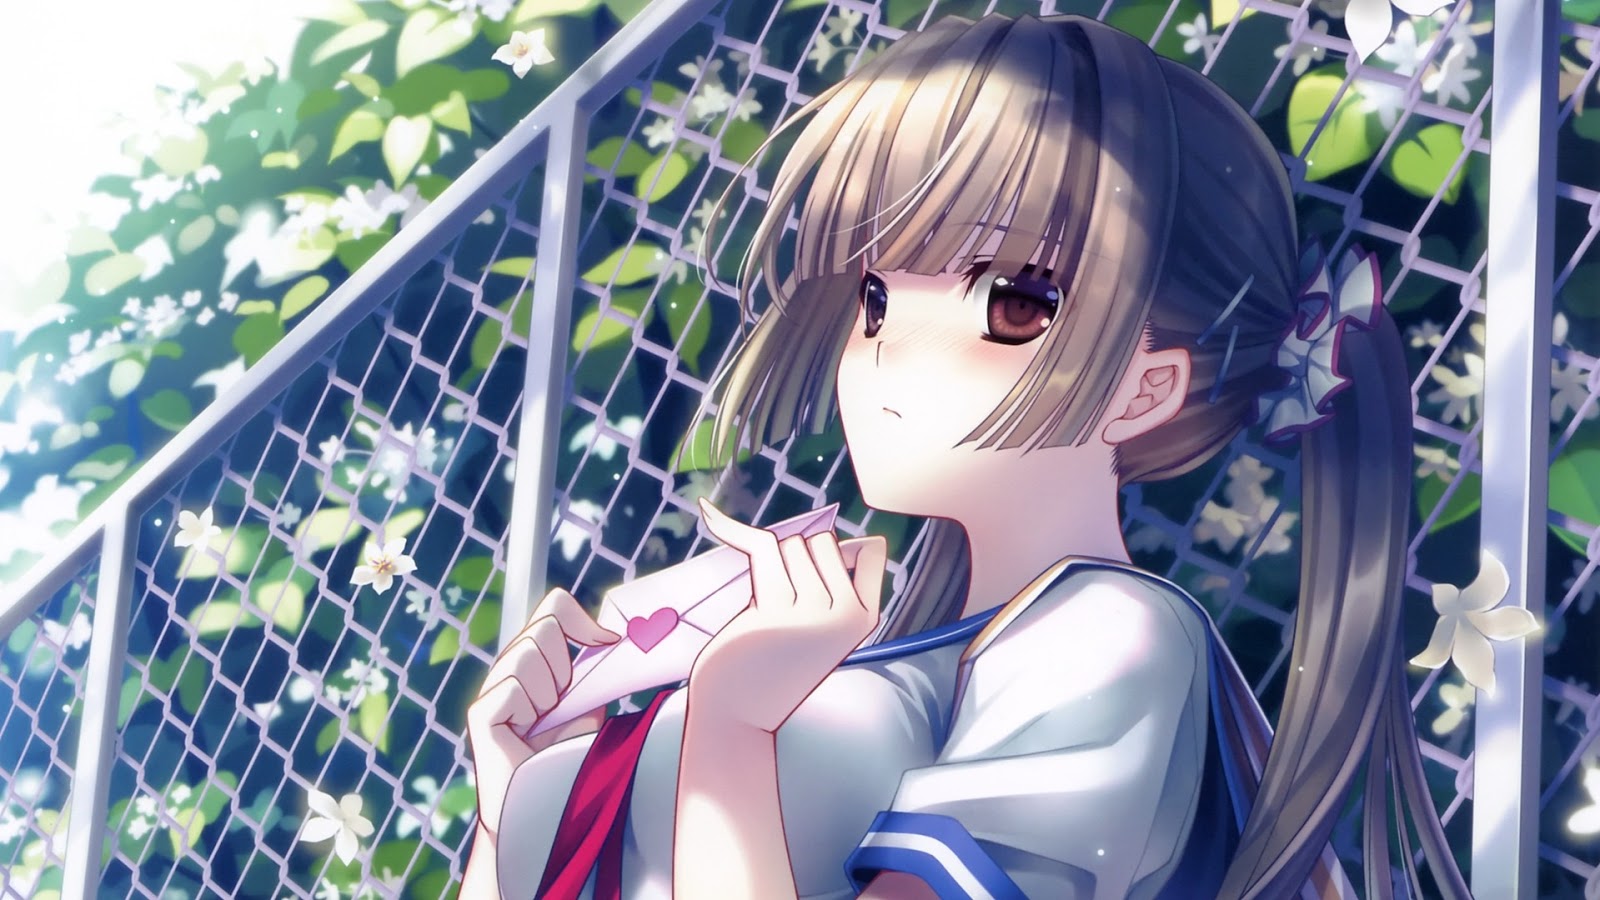 Download 10 of the most beautiful Anime 3D wallpapers for ...